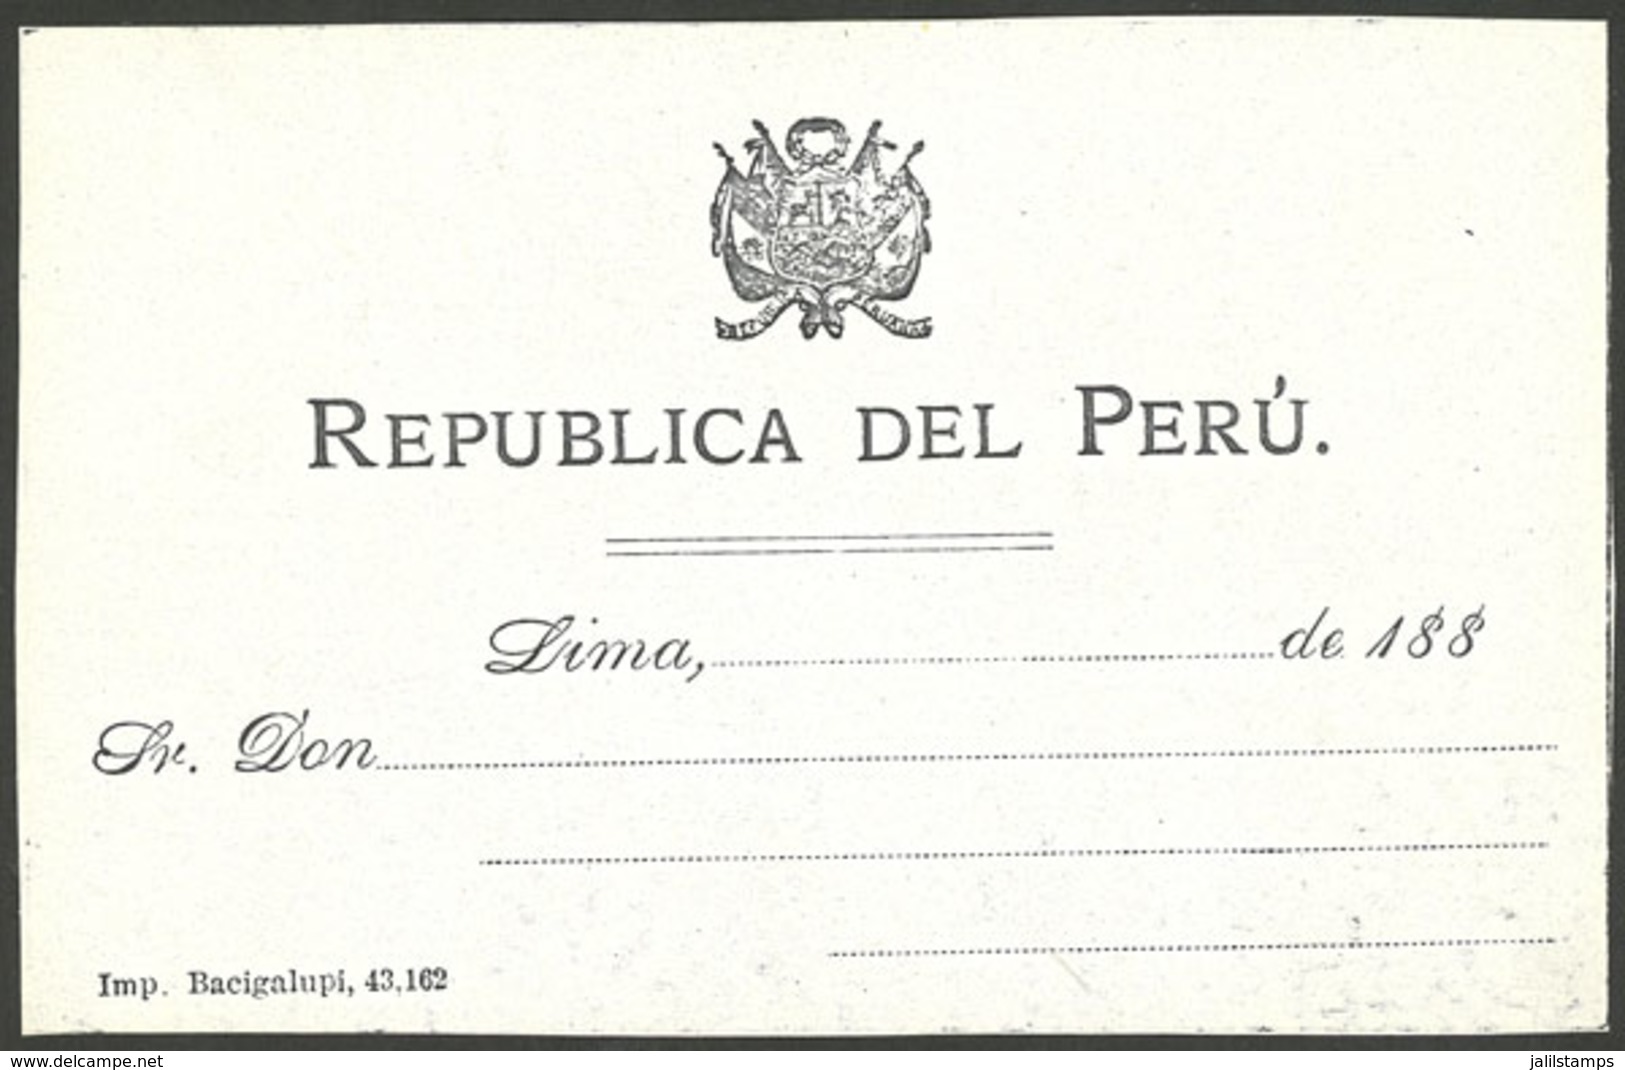 PERU: Unused Form For Sending Official Parcel Post, Very Old (circa 1880), Printed By Imprenta Bacigalupi, Rare! Ex-Herb - Unclassified